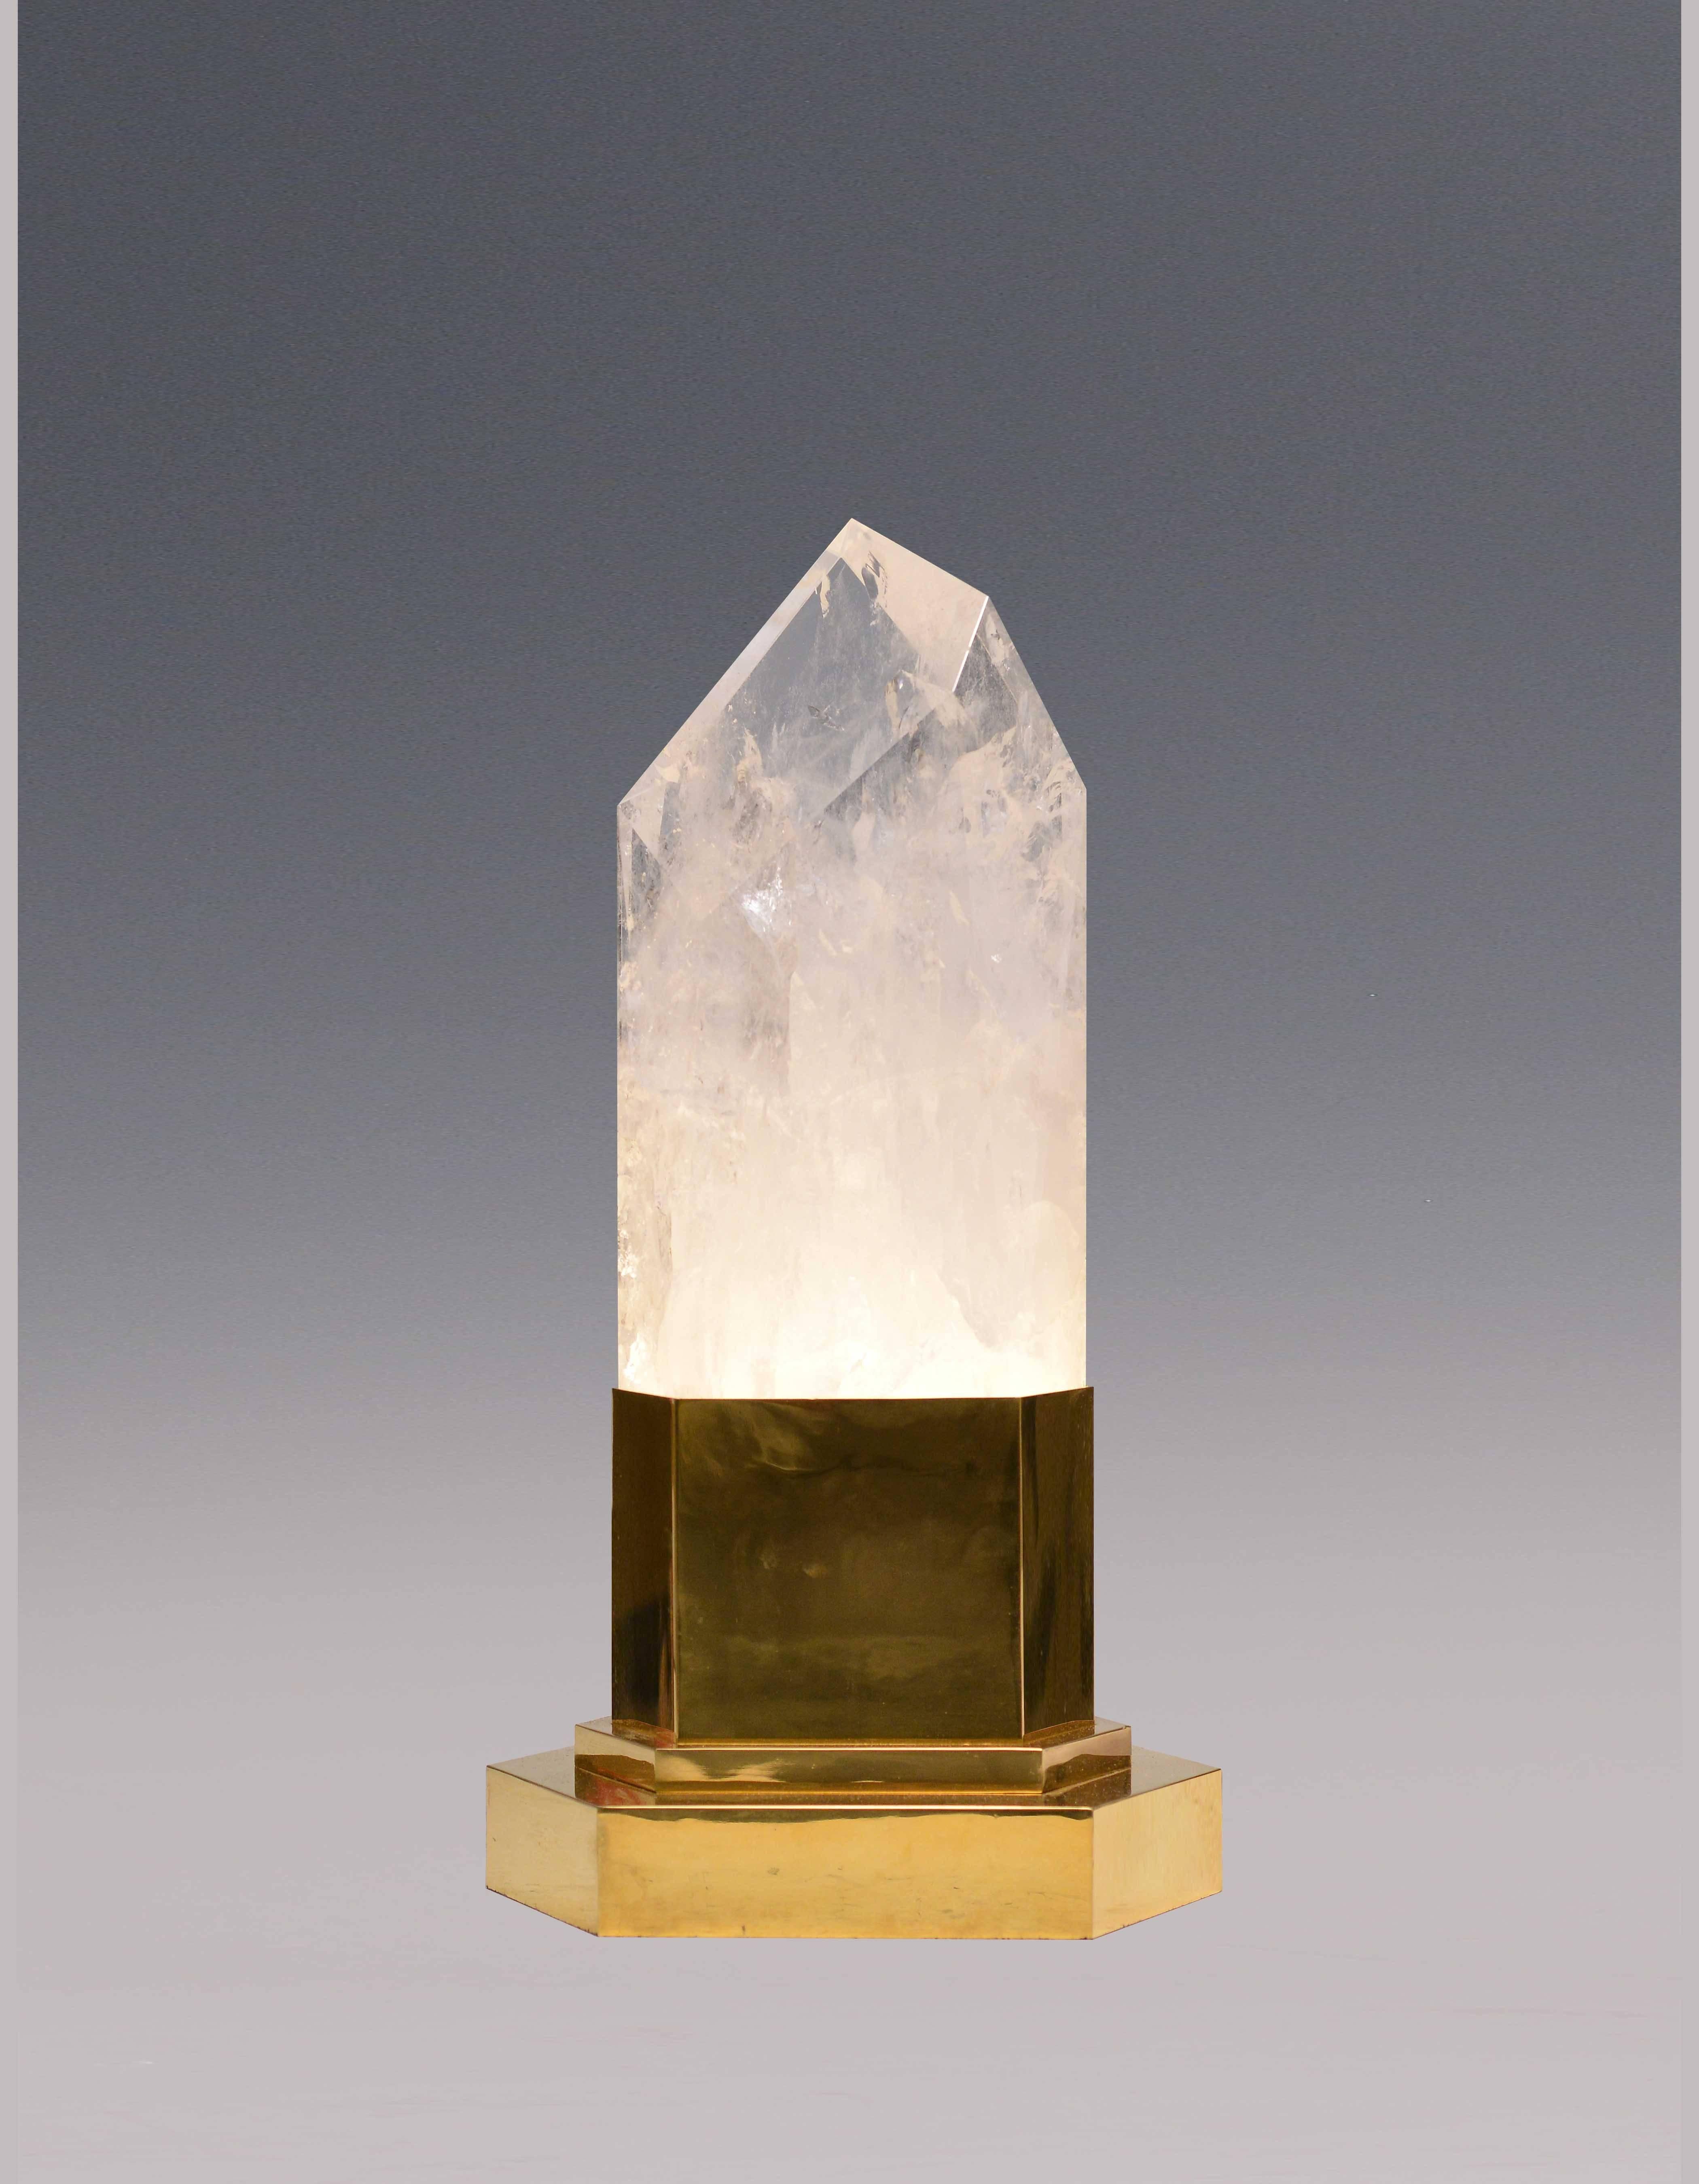 A fine carved rock crystal quartz obelisk light with tall polish brass base, created by Phoenix Gallery, NYC.
Available in nickel plating and antique brass finish. 
One socket installed with max 60 watt. 
A pair available.